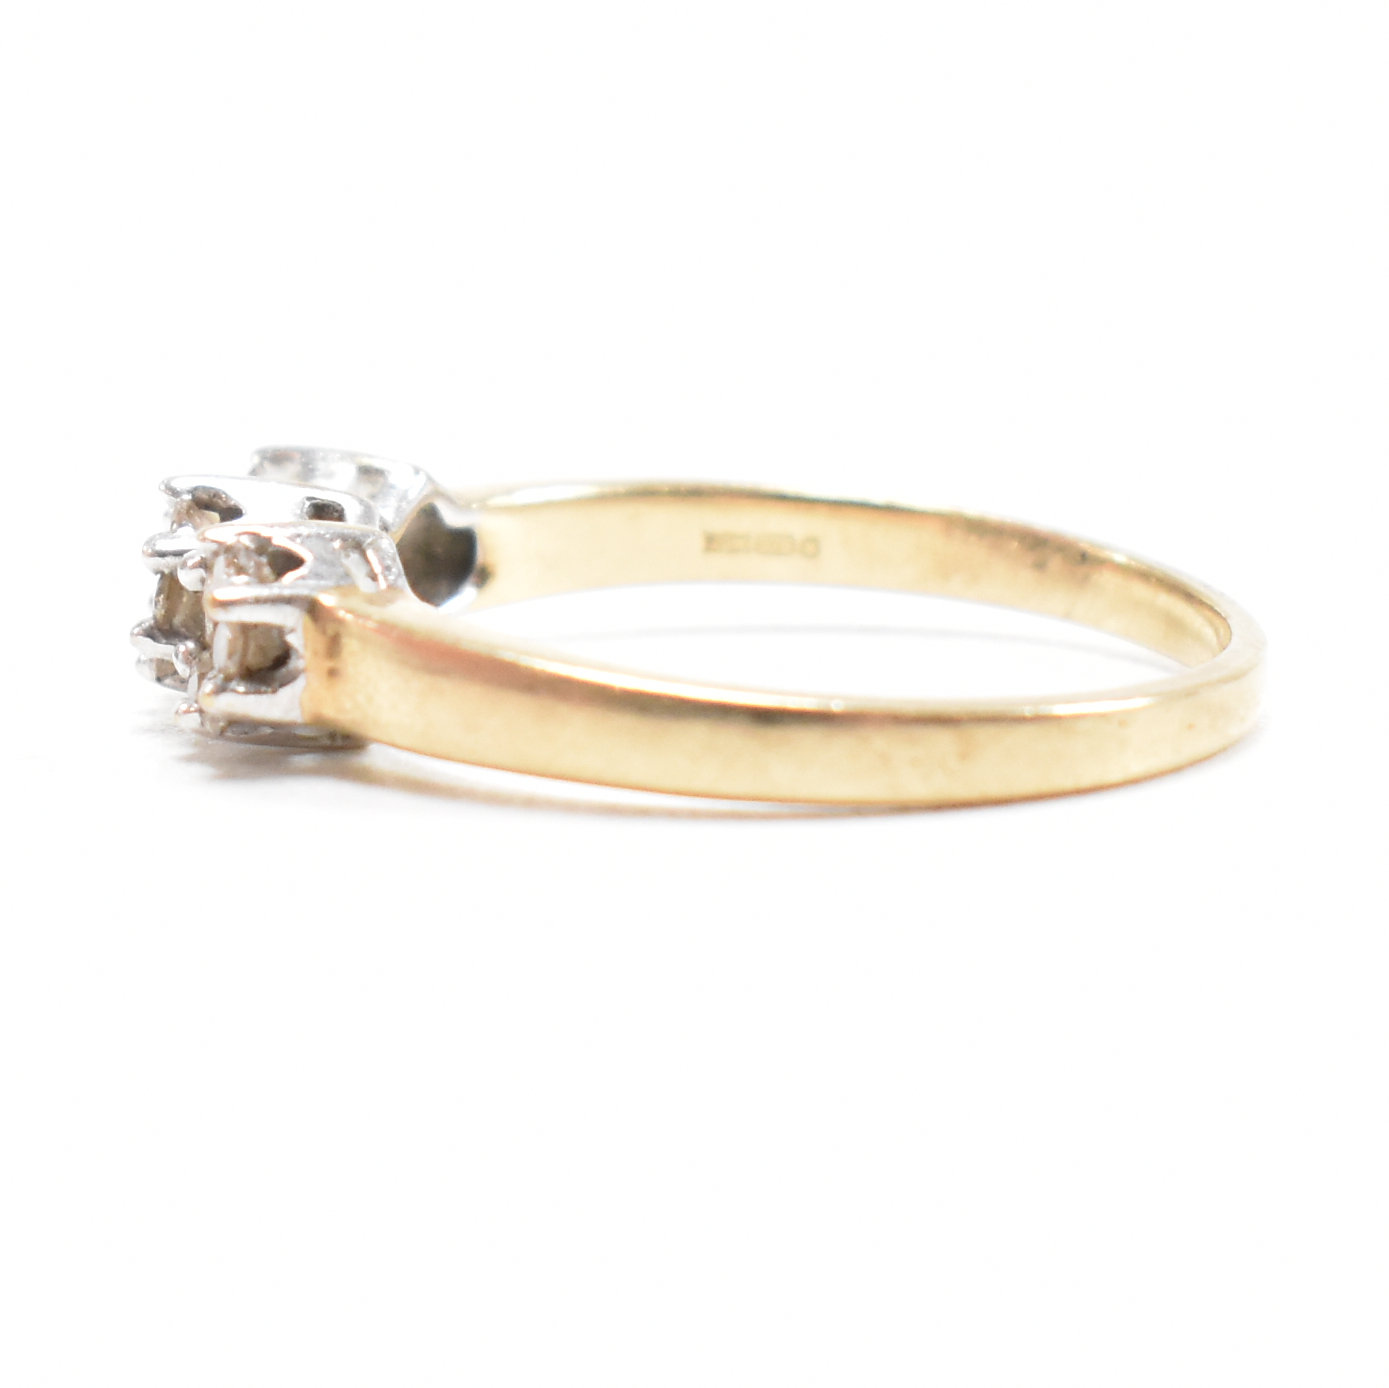 HALLMARKED 9CT GOLD & DIAMOND CLUSTER RING - Image 4 of 8